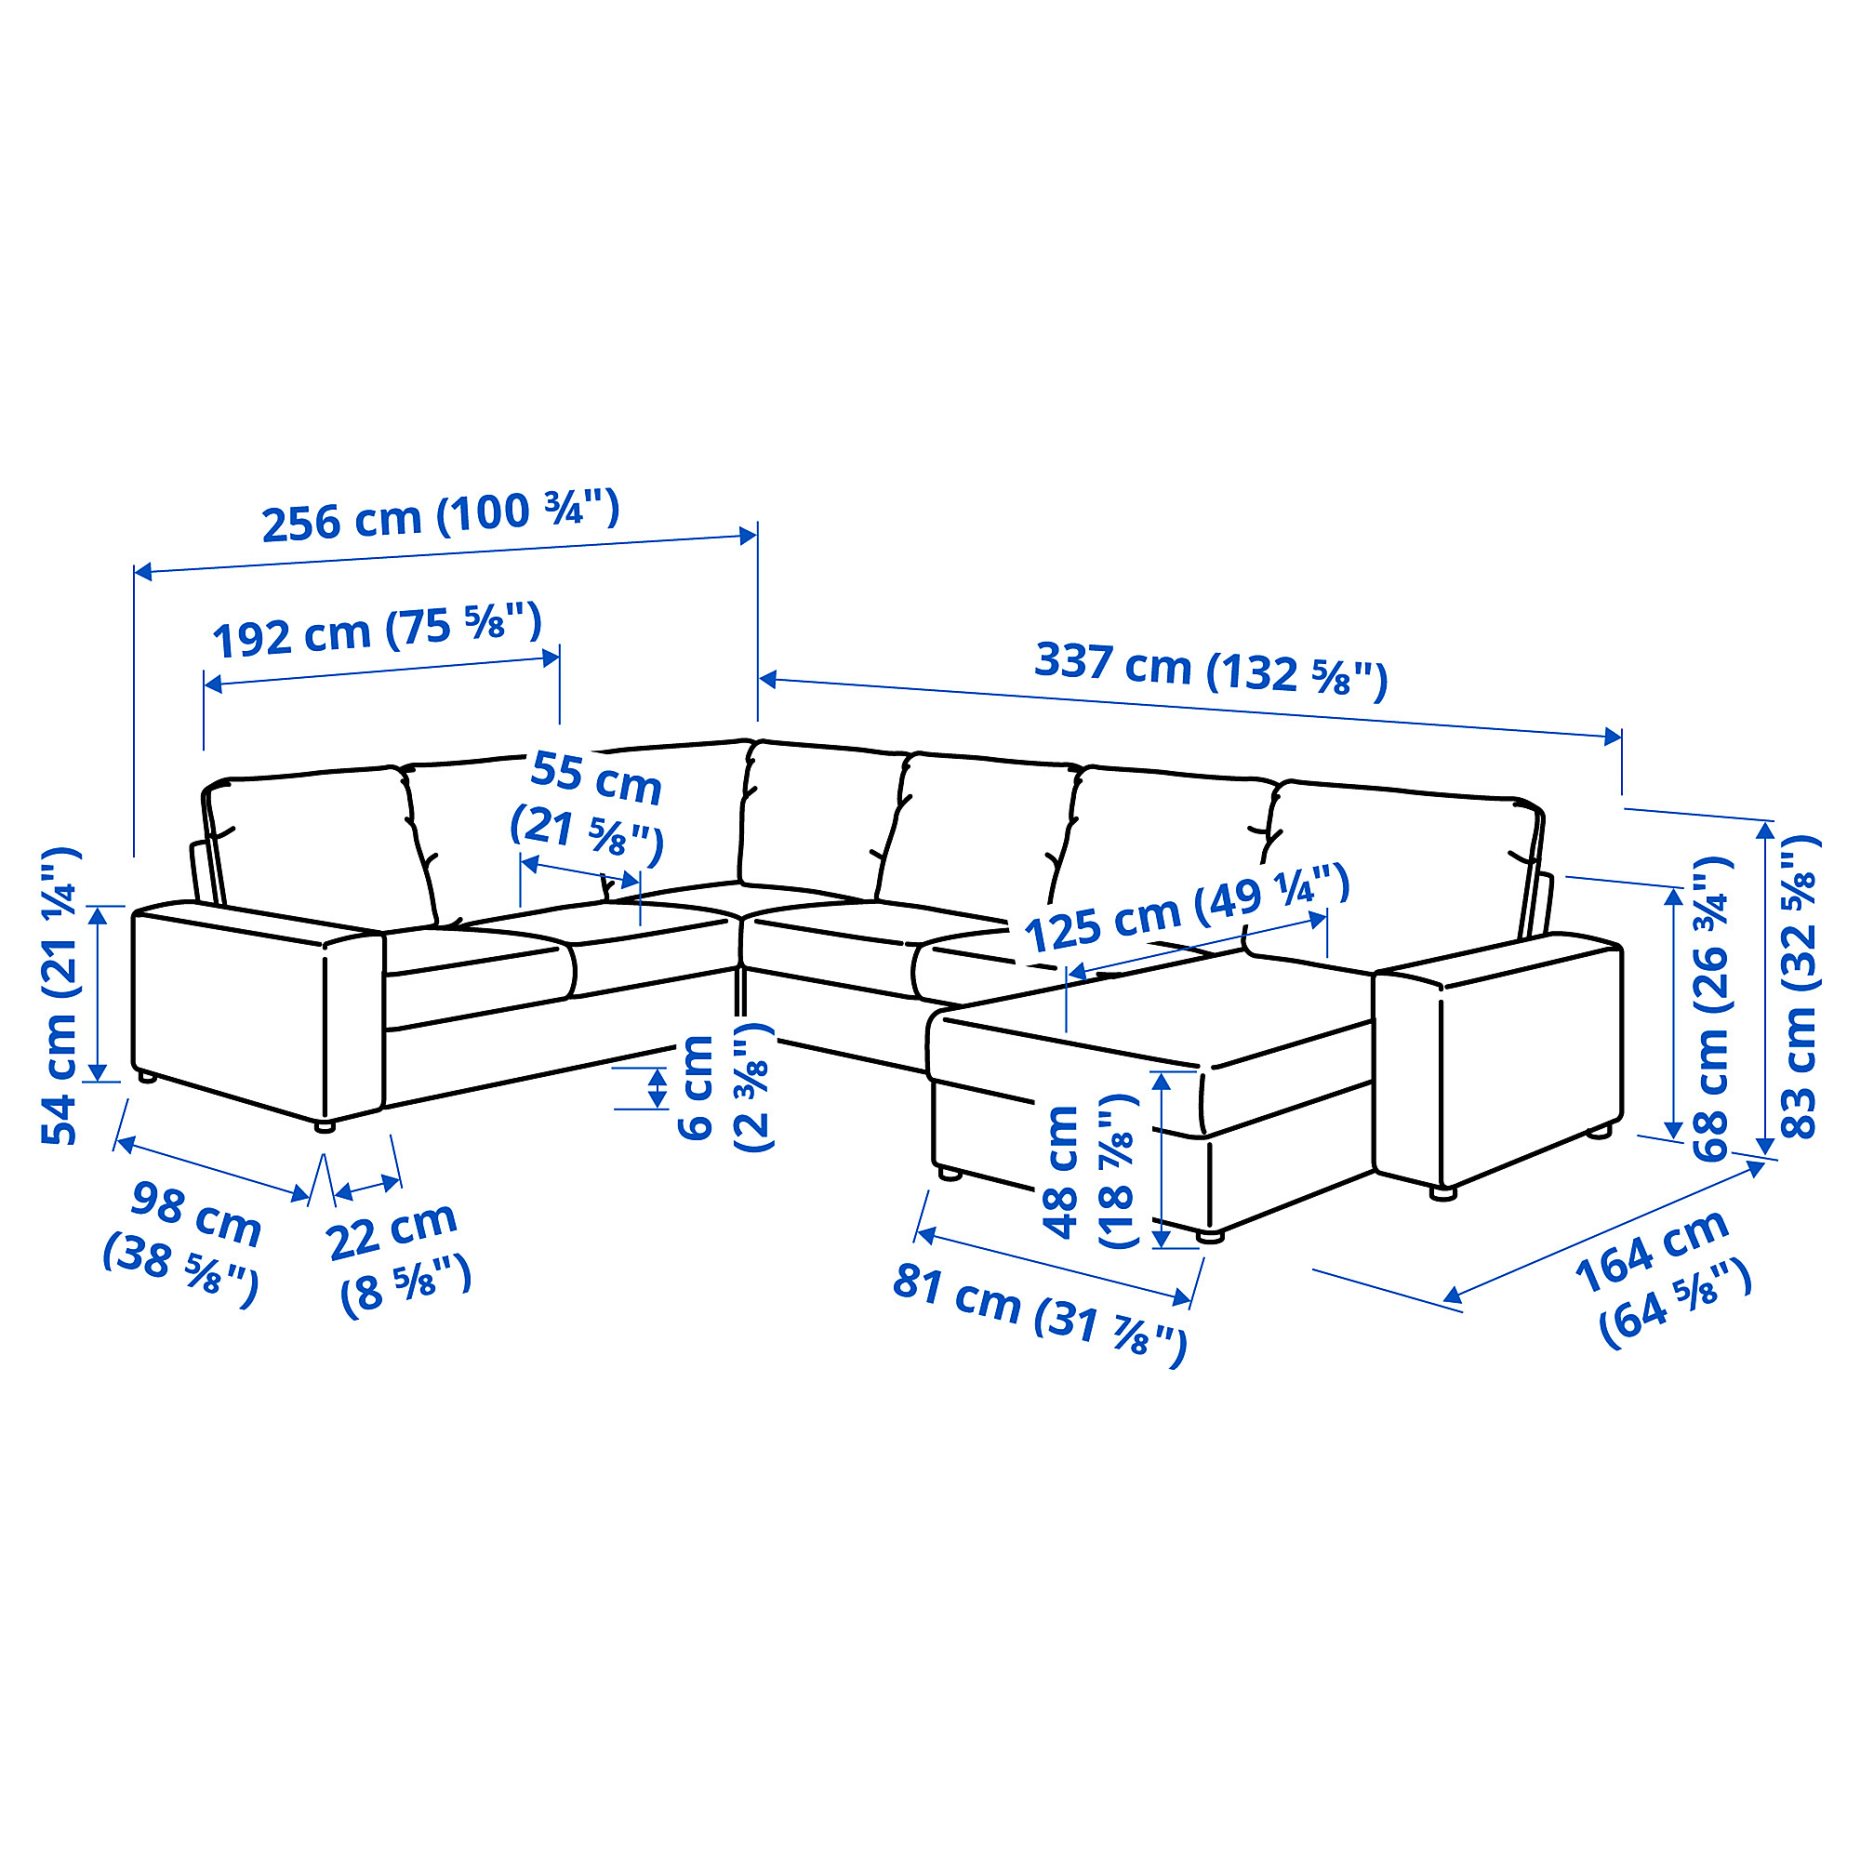 VIMLE, corner sofa, 5-seat with chaise longue with wide armrests, 994.018.24